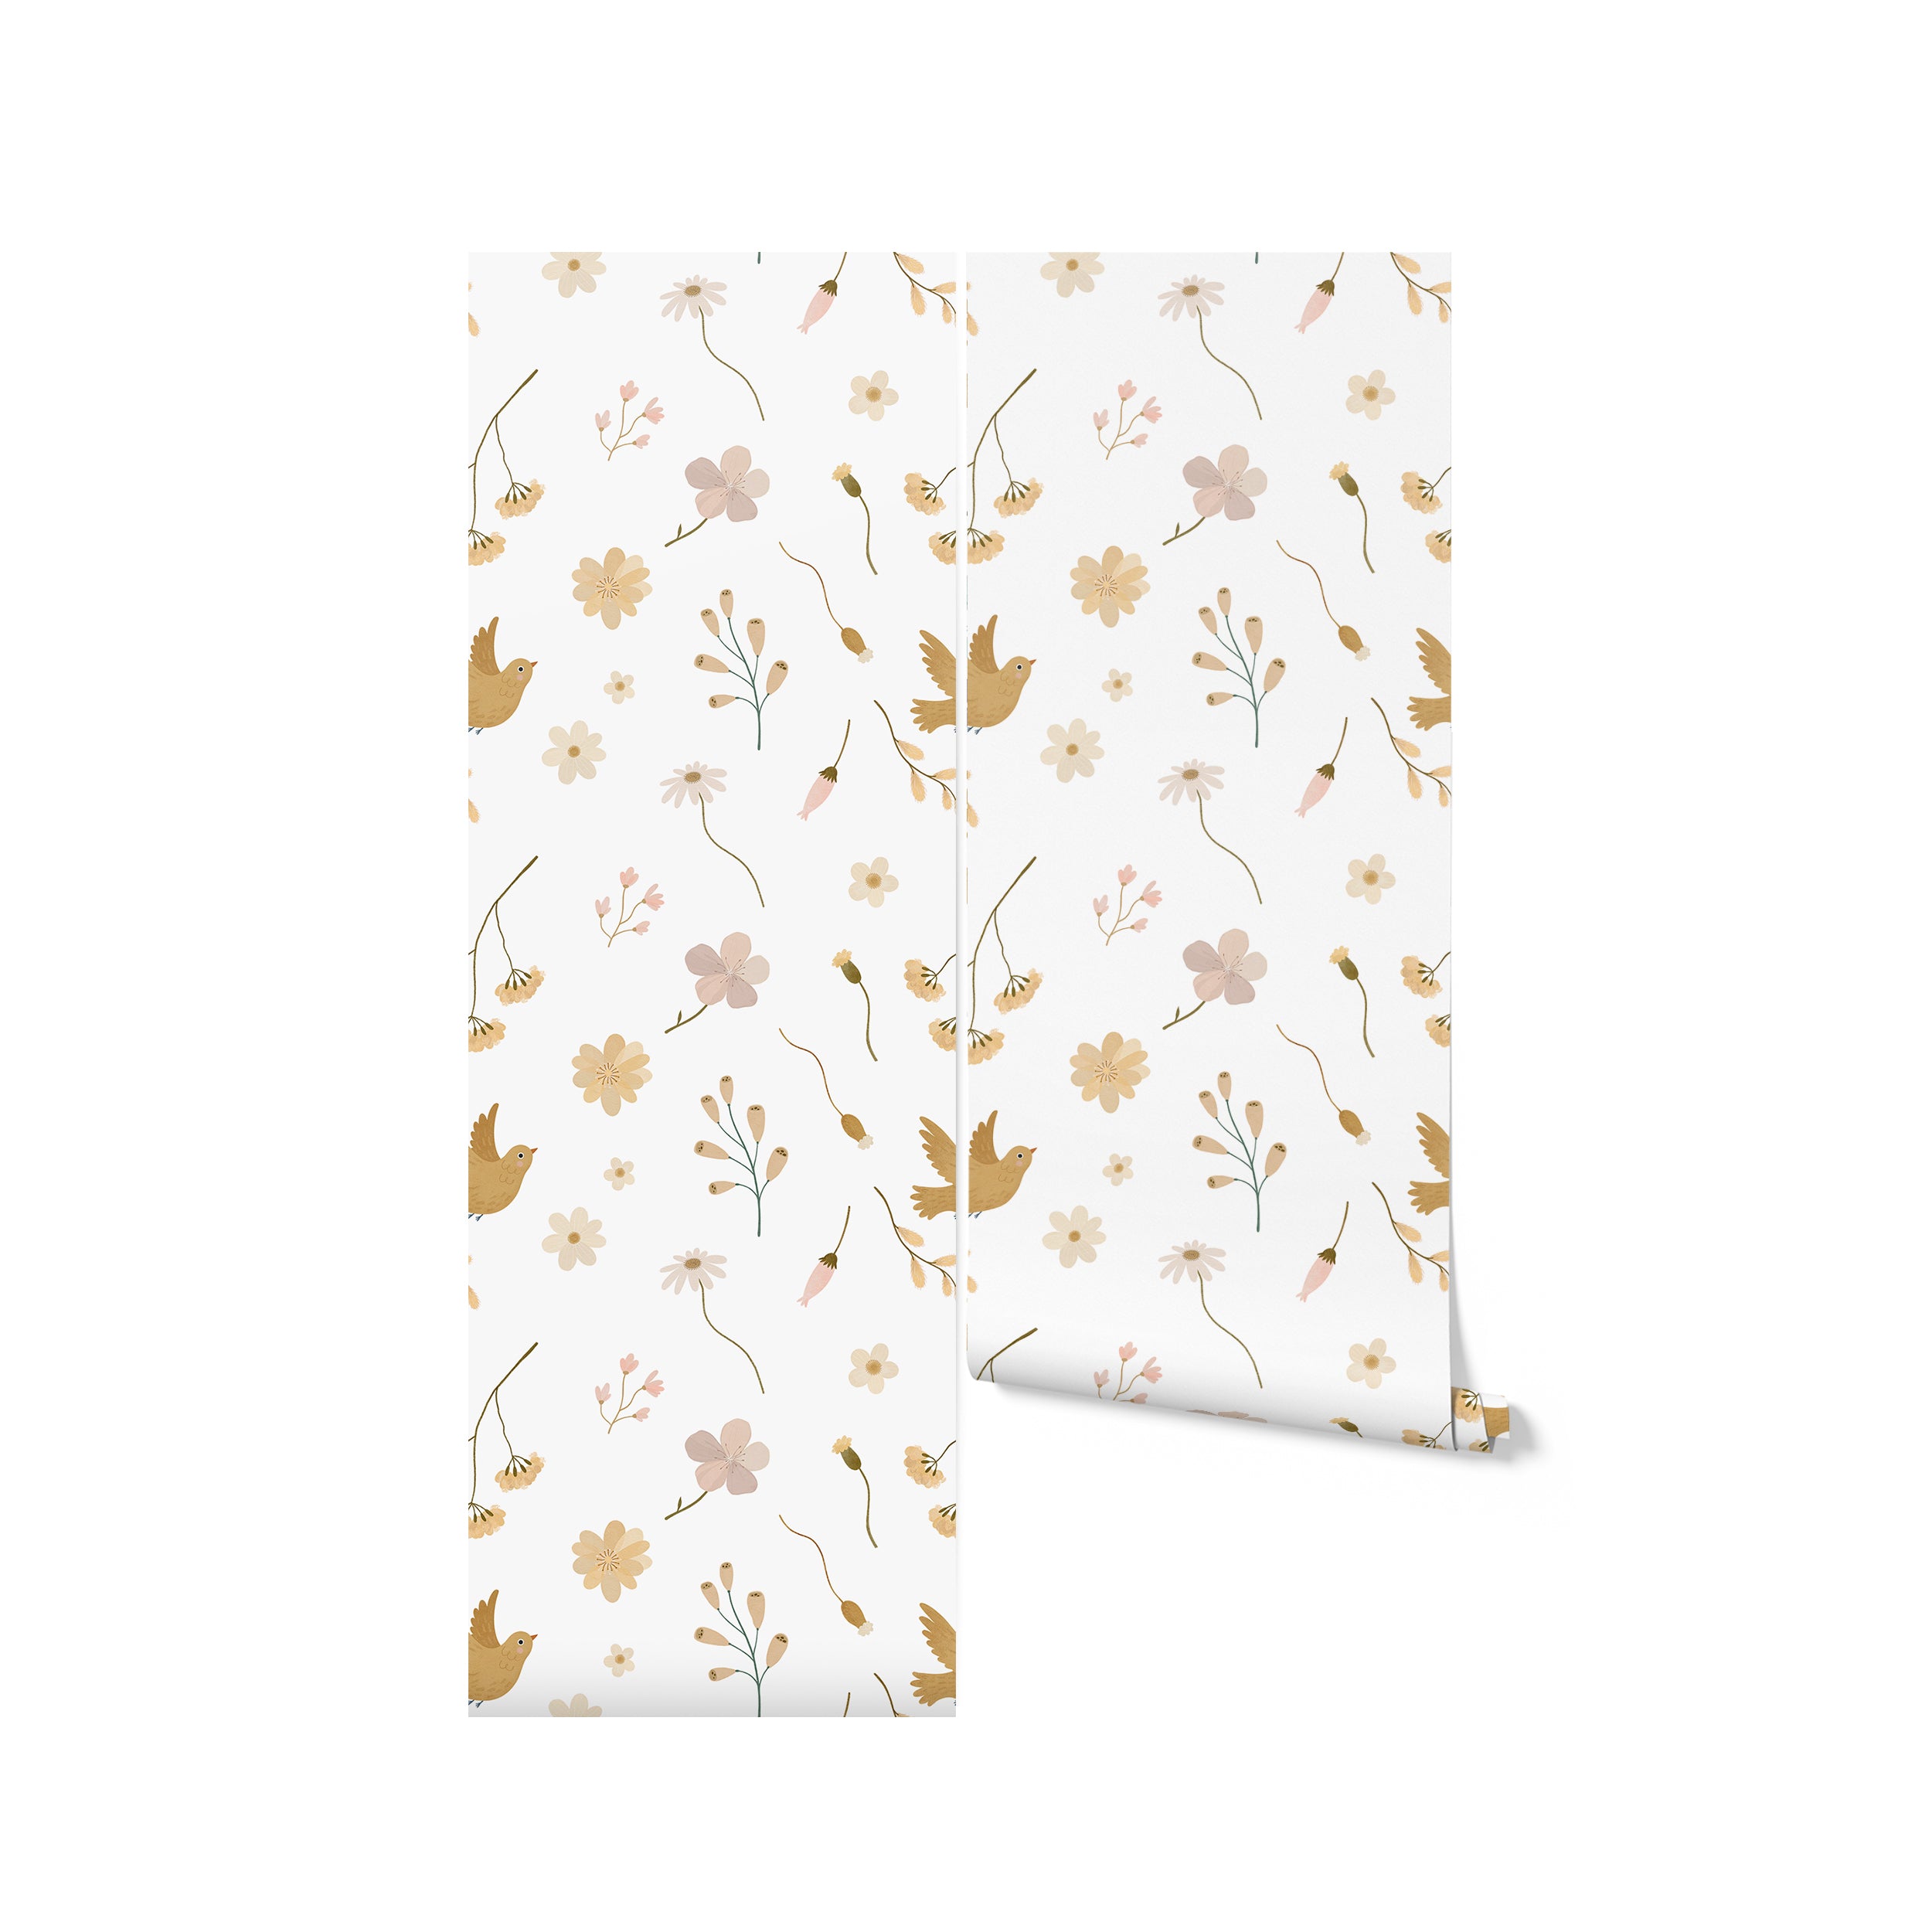 A roll of Pastel and Paradise Wallpaper displaying a gentle and charming pattern of small flowers and birds in pastel tones on a white background, perfect for creating a peaceful space in any home